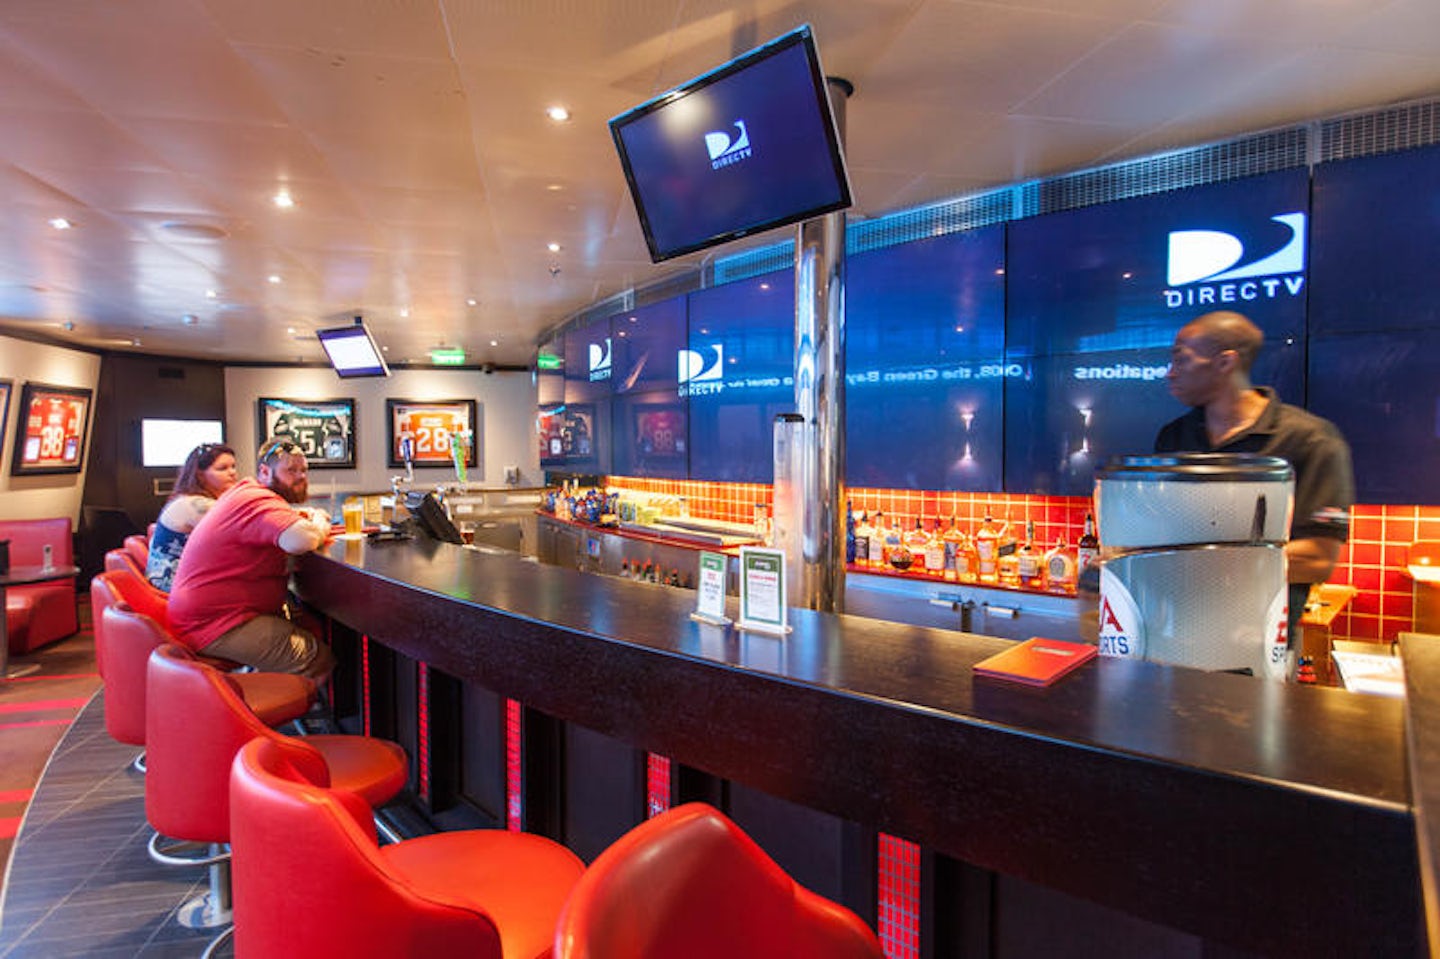 The Sports Bar on Carnival Conquest